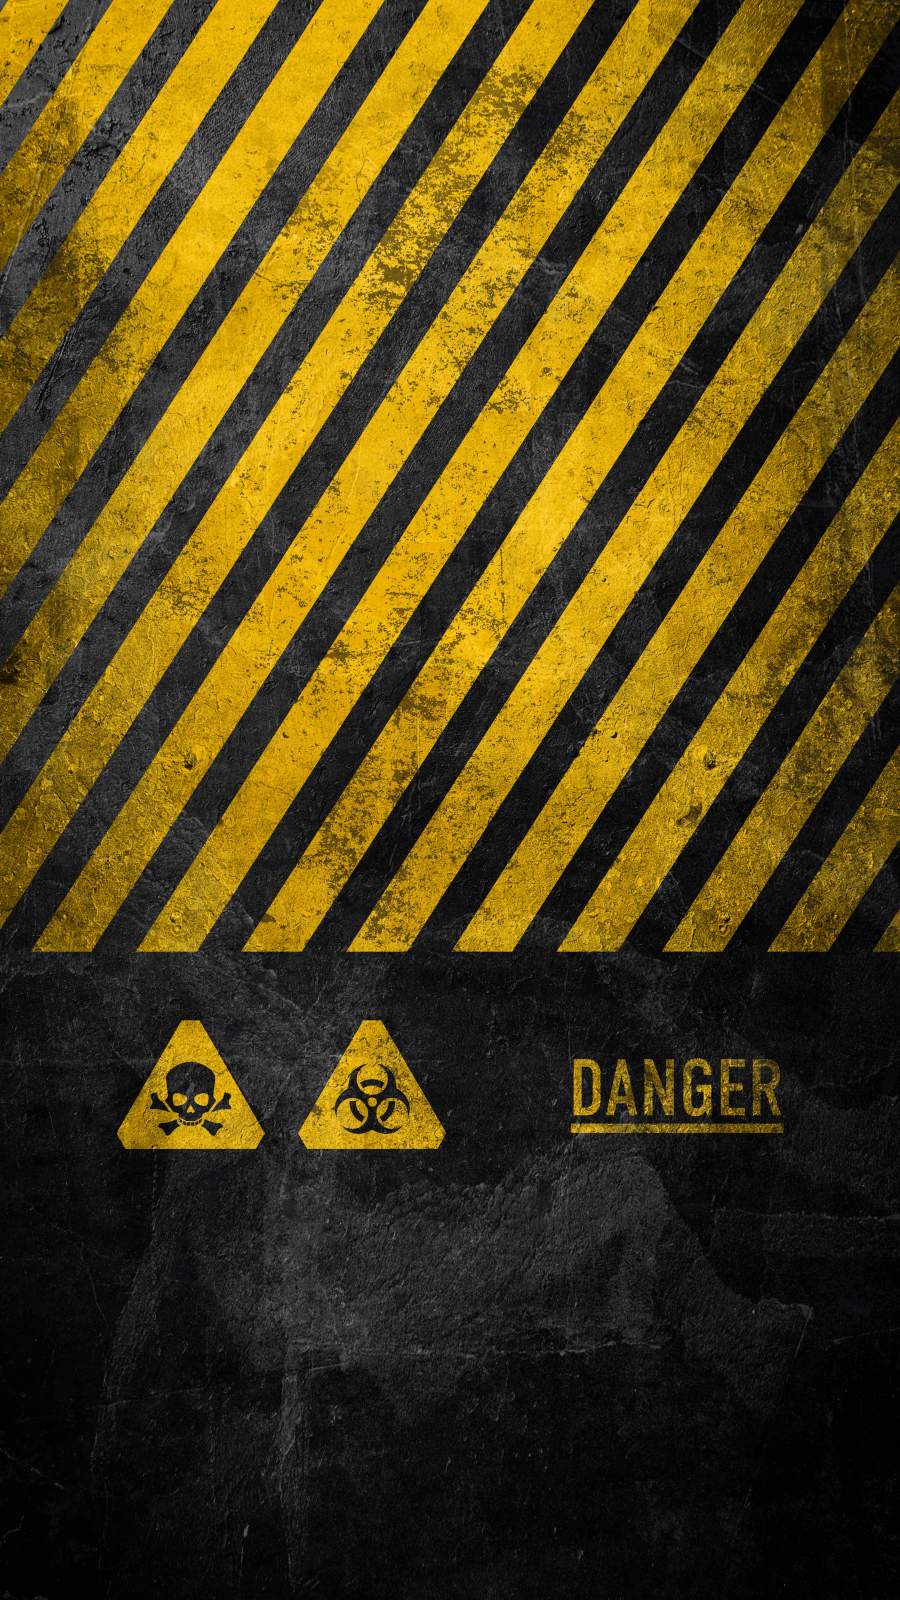 Danger Warning Background - IPhone Wallpapers : iPhone Wallpapers